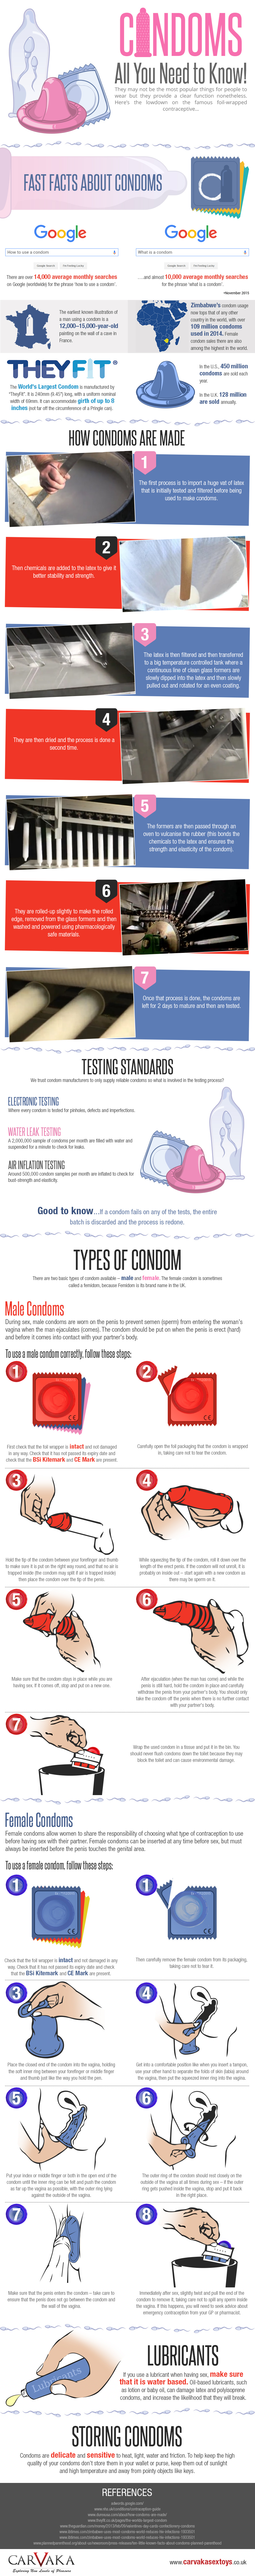 Condoms-all-you-need-to-know (1)